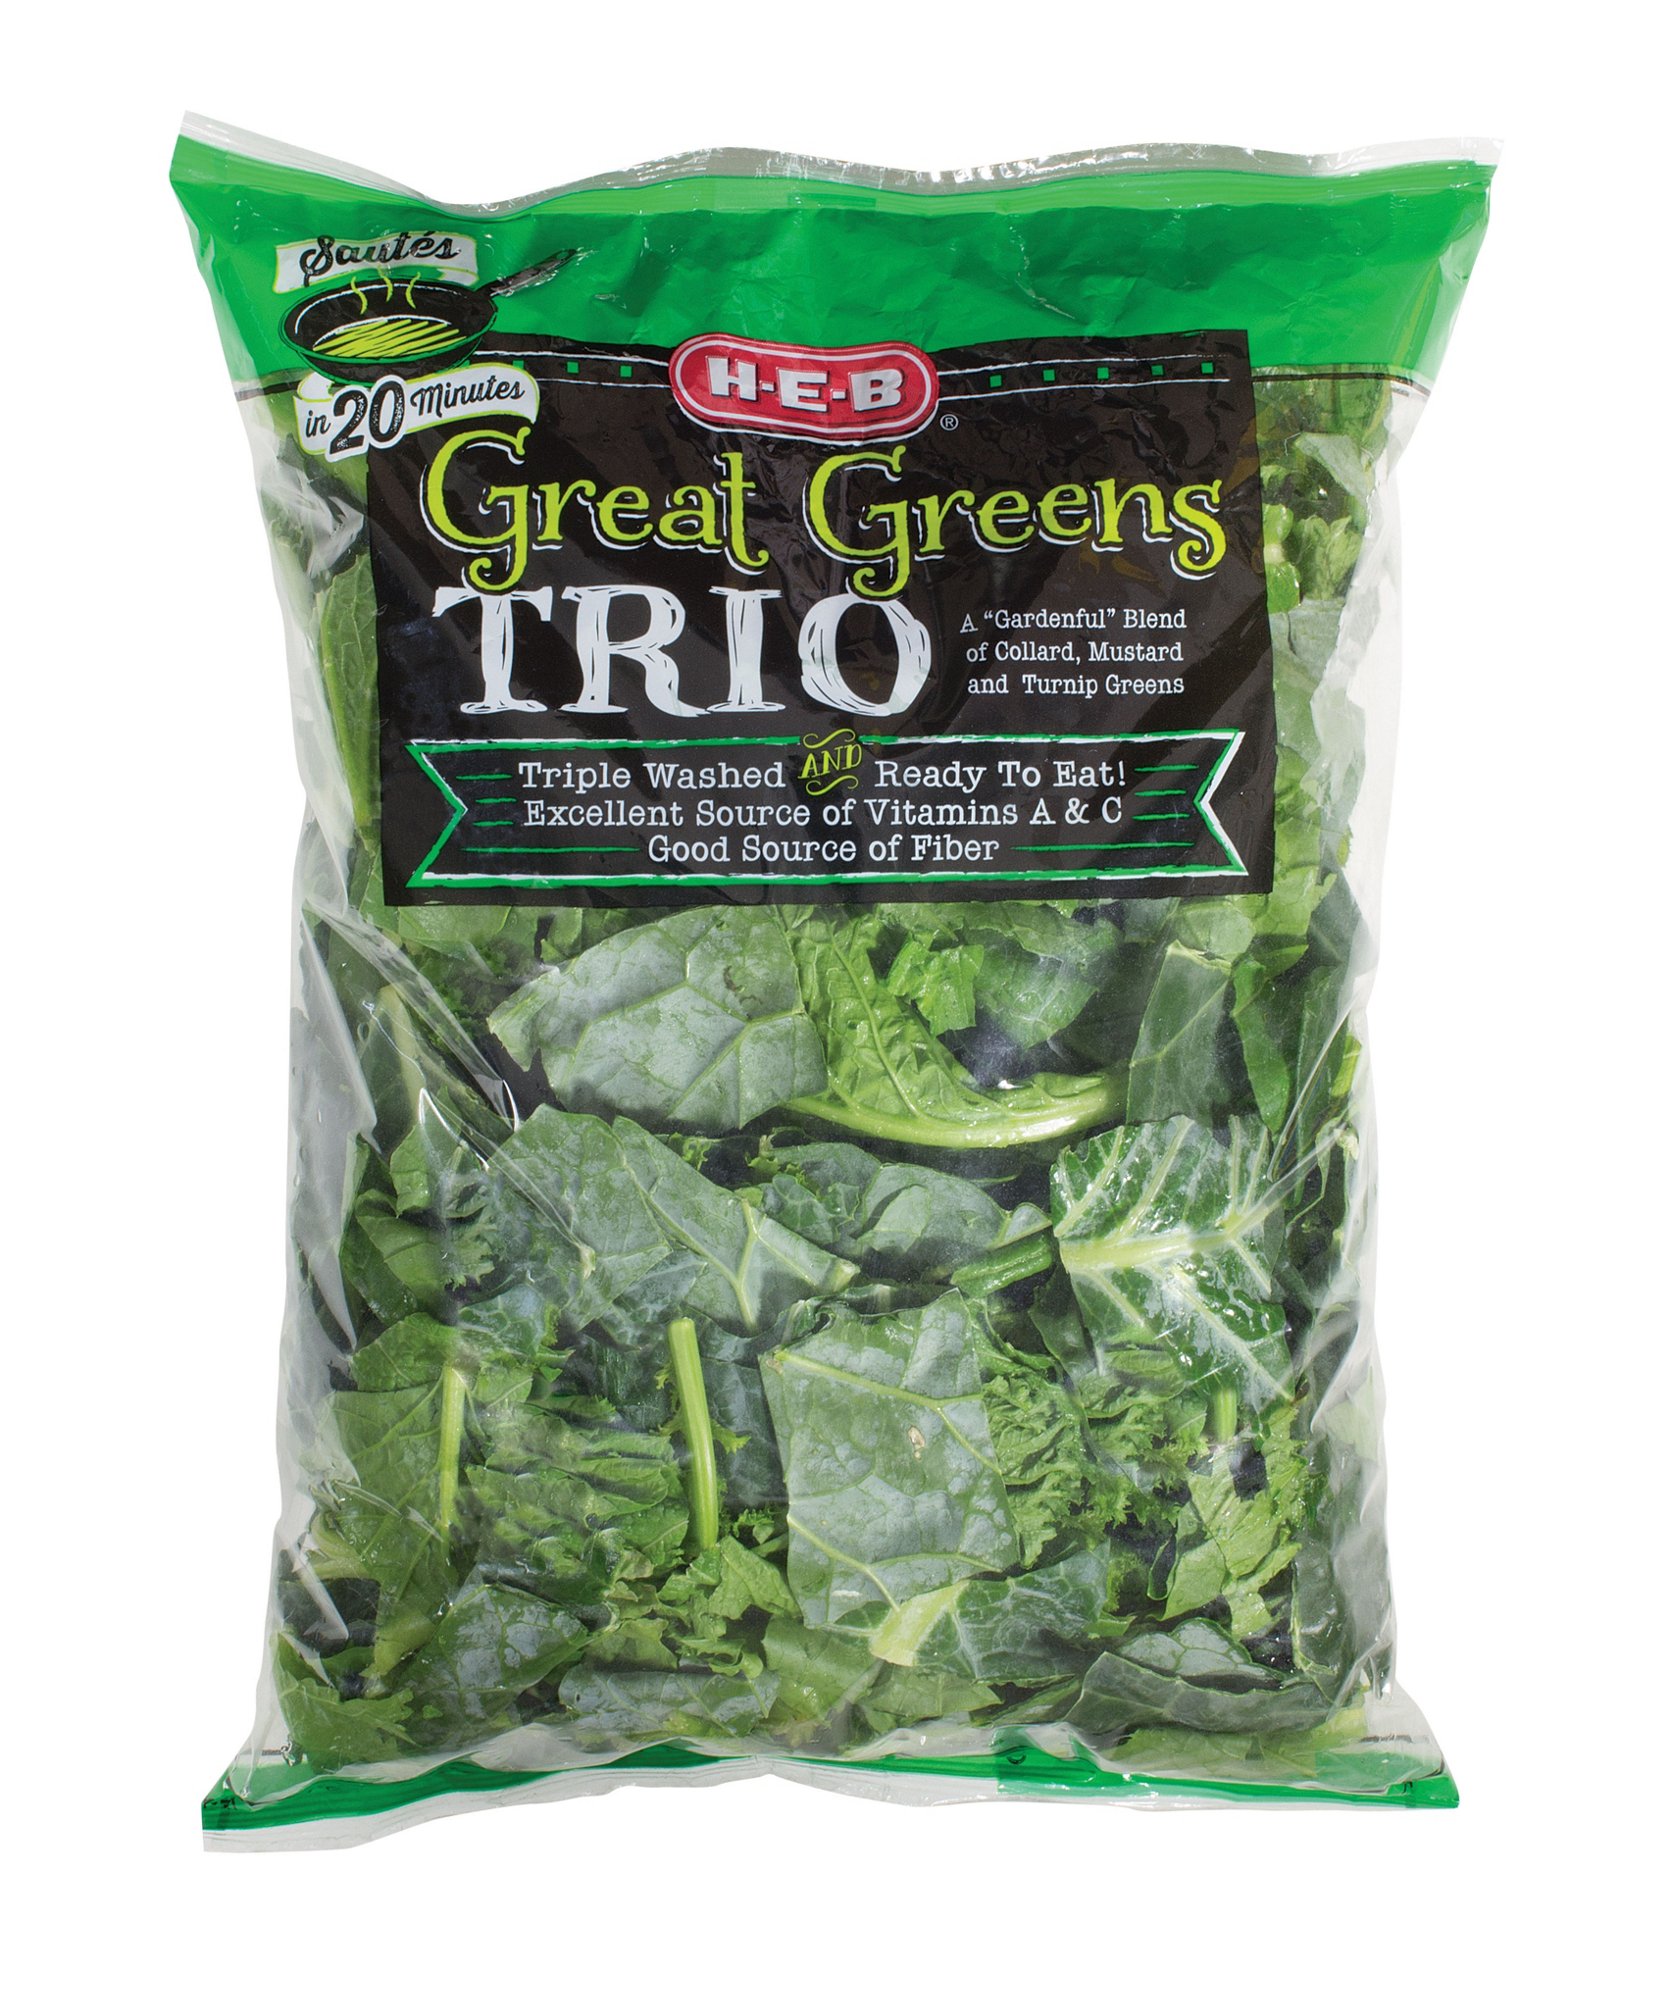 H‑E‑B Great Greens Trio ‑ Shop Cabbage and Greens at HEB